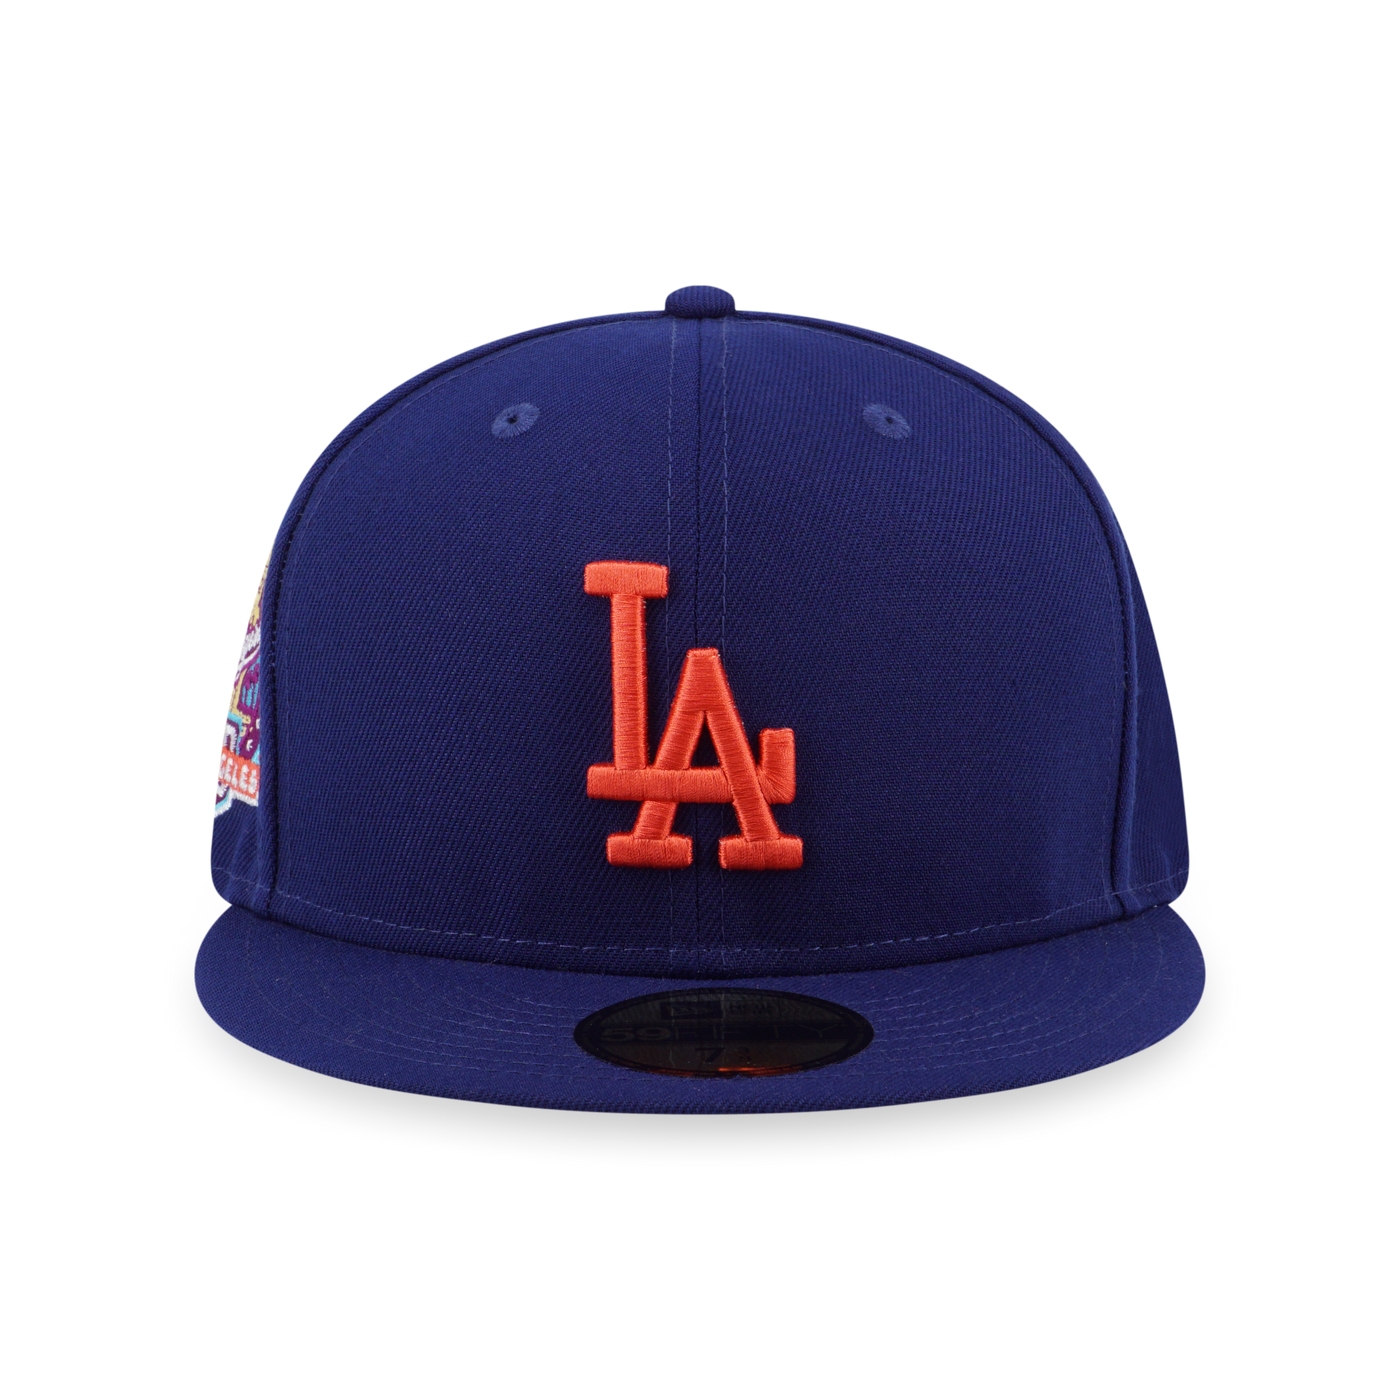 59FIFTY PACK - INTERSTELLAR JELLY LOS ANGELES DODGERS DARK BLUE 59FIFTY CAP